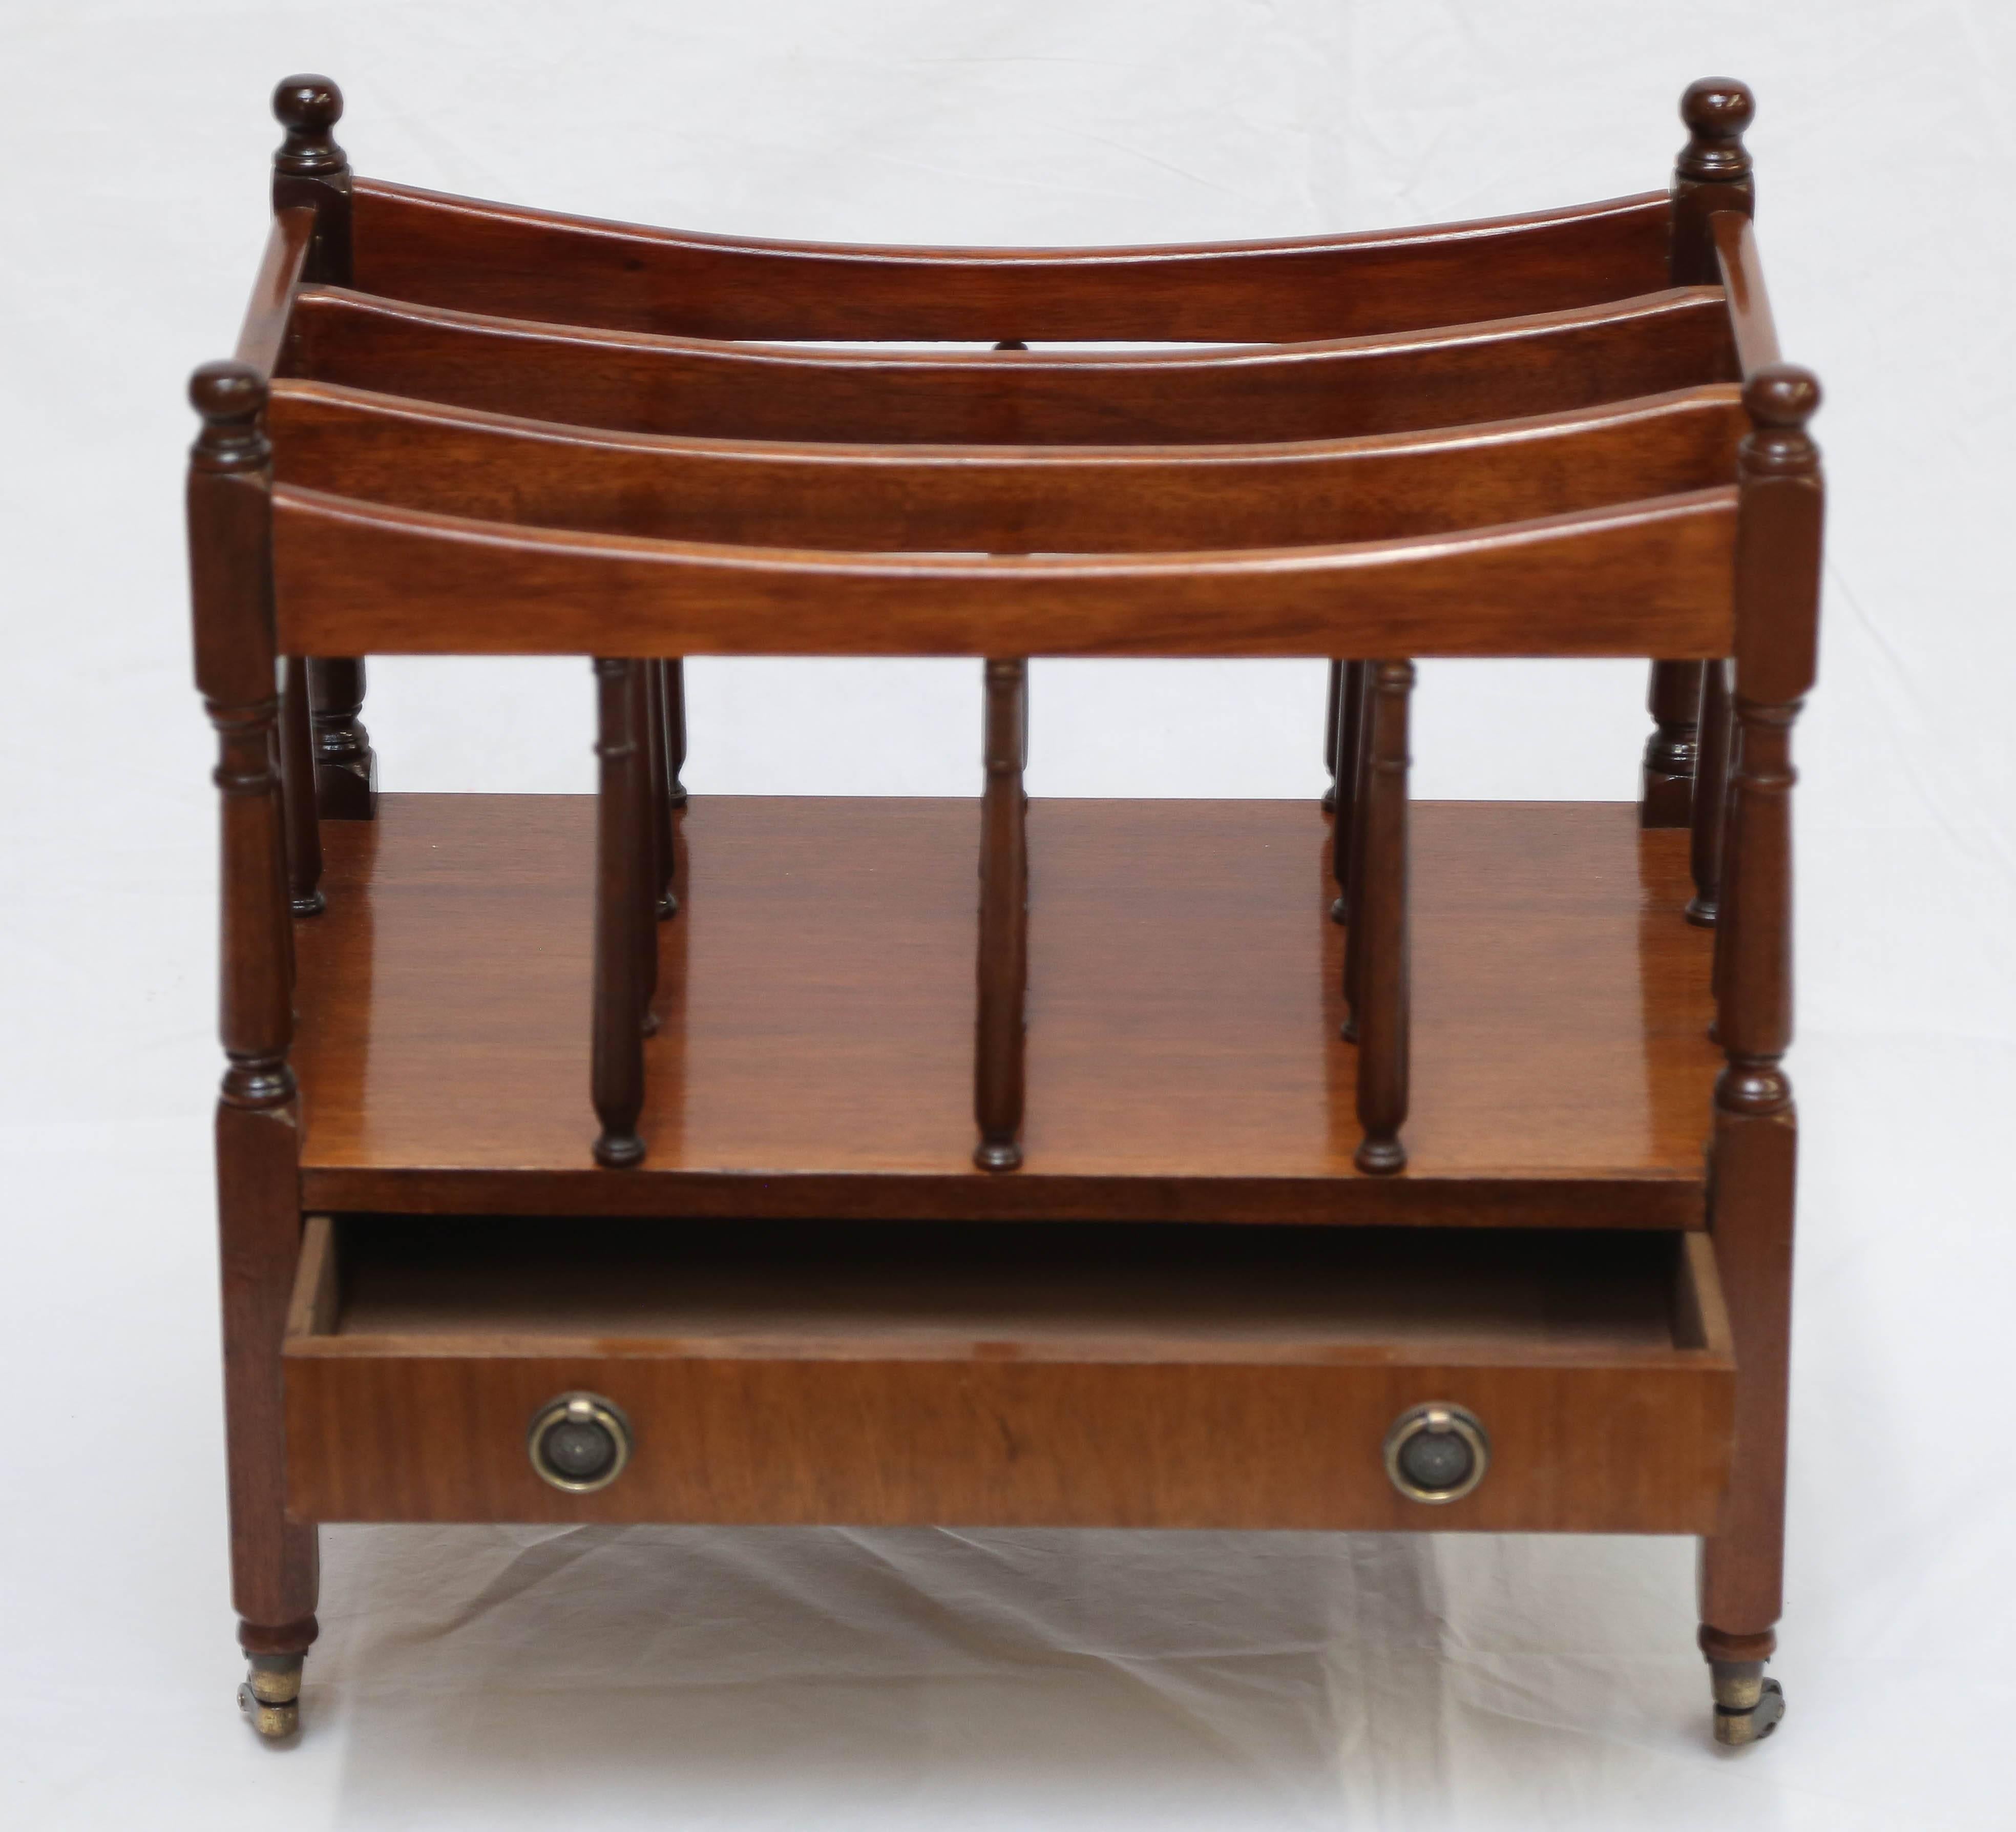 Featuring four compartments over a drawers; on brass casters. The canterbury was the original magazine/newspaper rack. This period example is elegant in its simplicity.